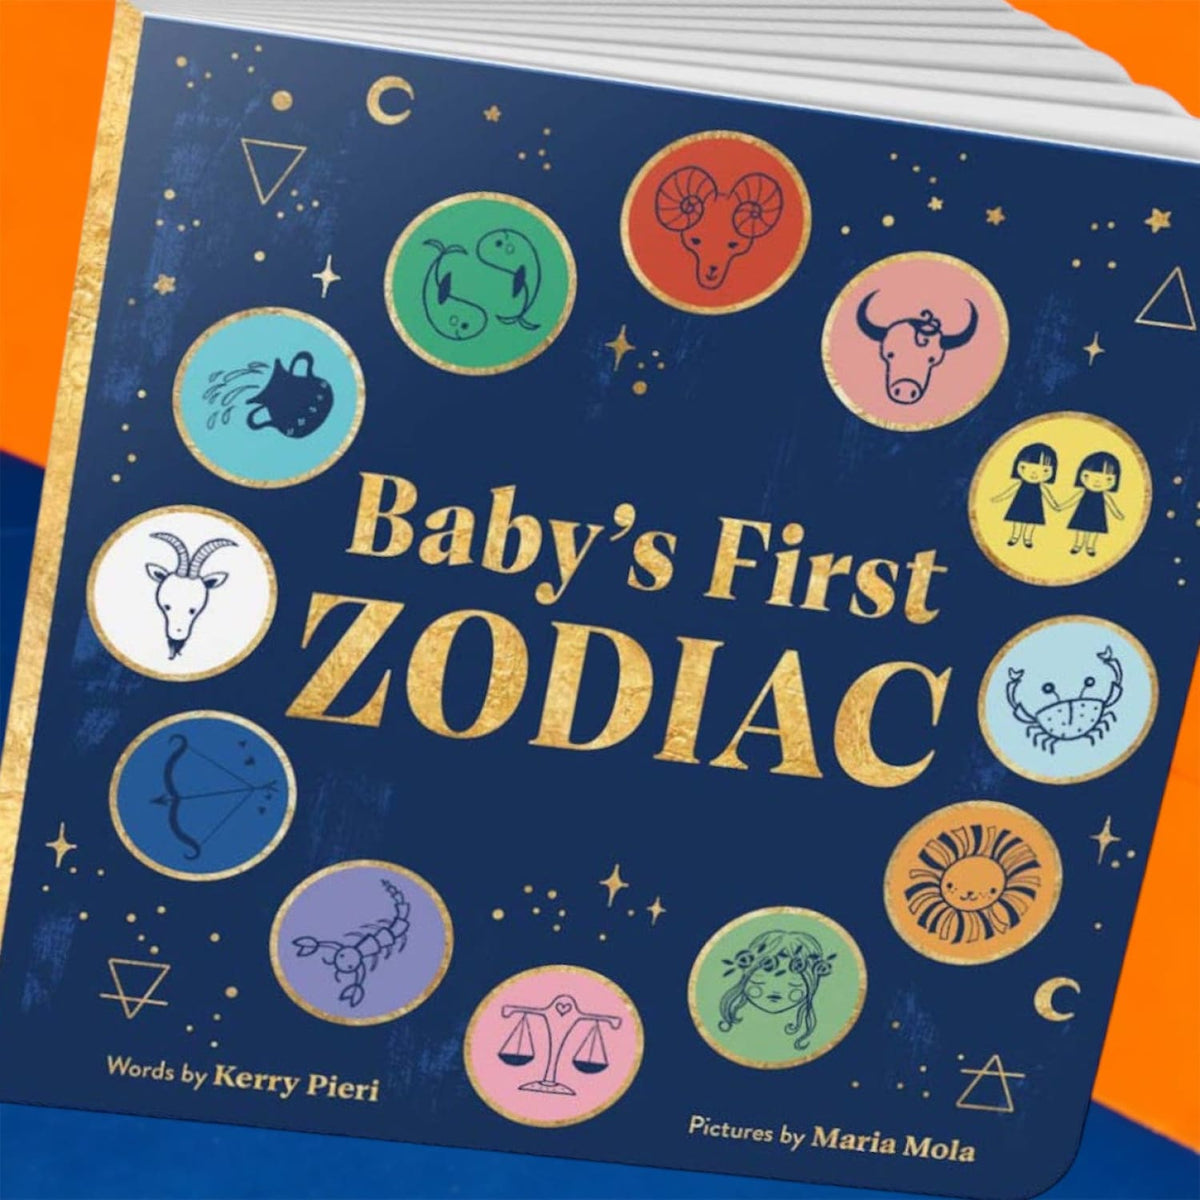 Baby’s First Zodiac Board Book Baby Gift - Shower - For Kids